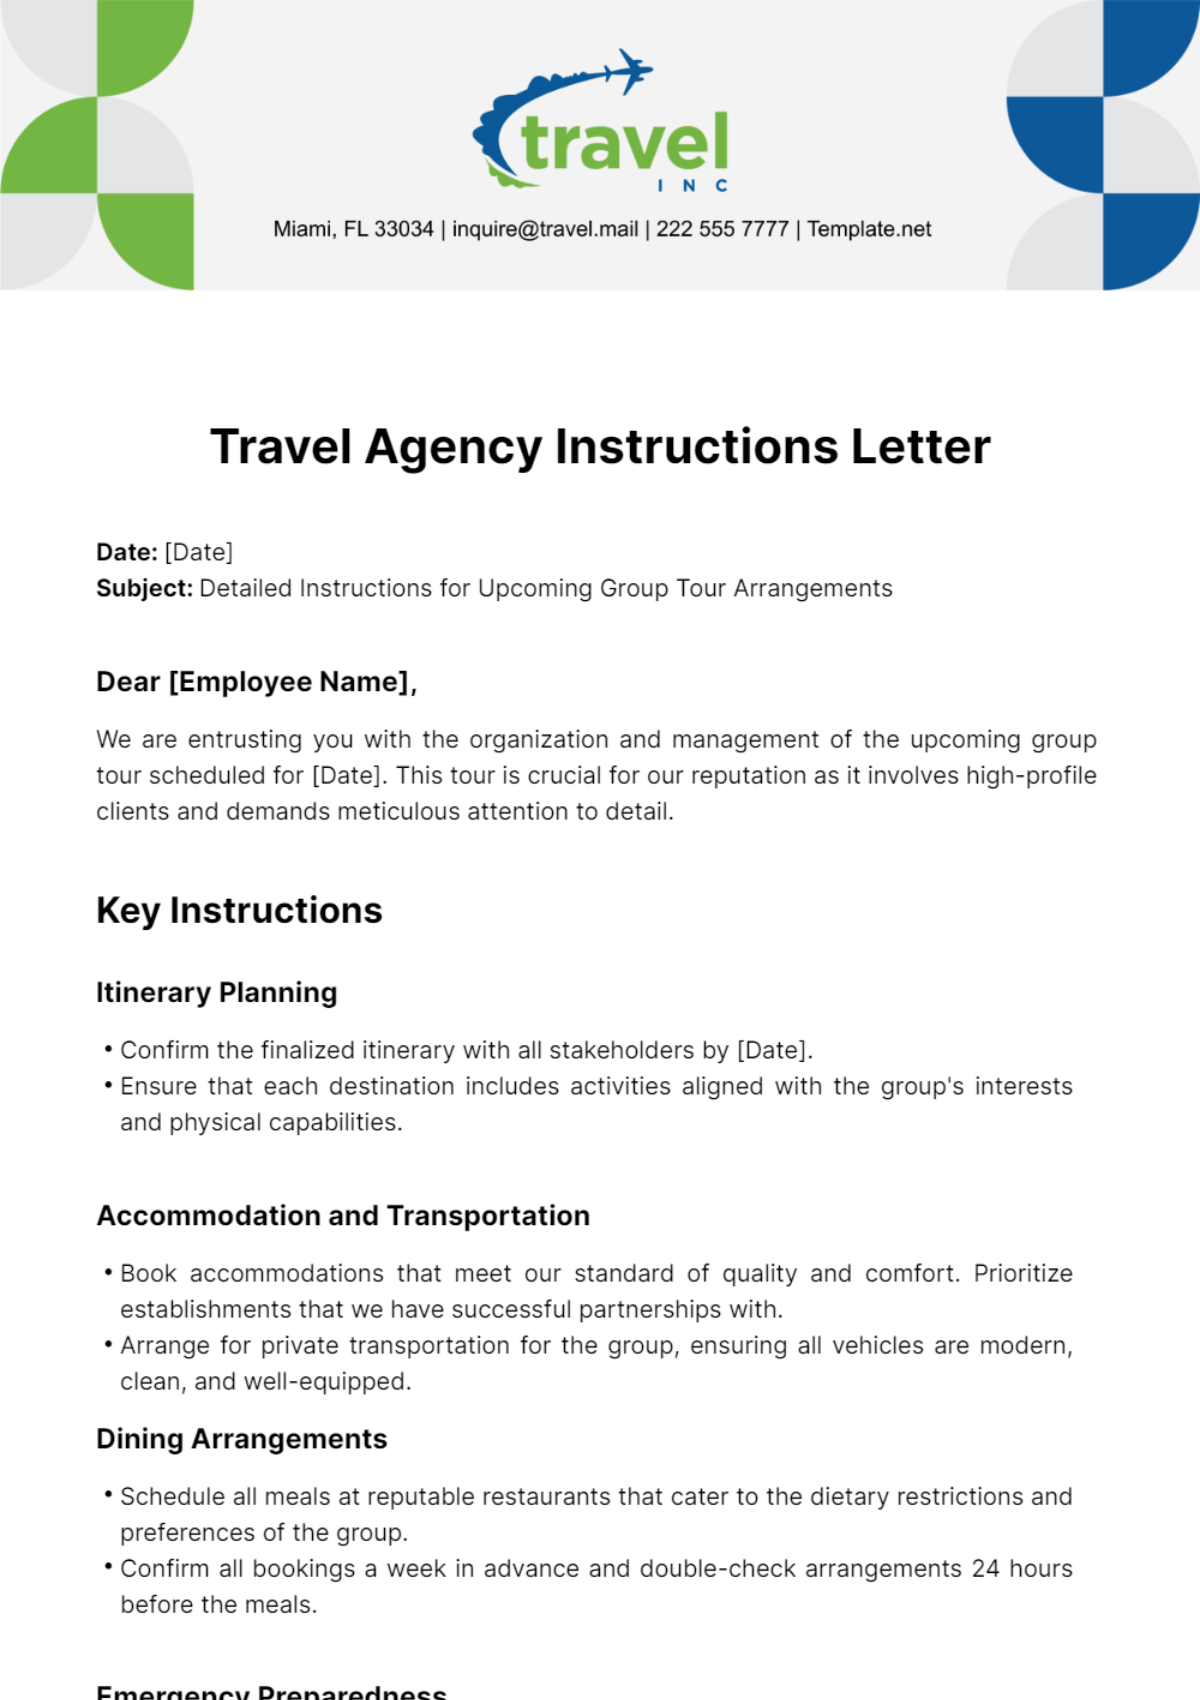 Free Travel Agency Instructions Letter Template